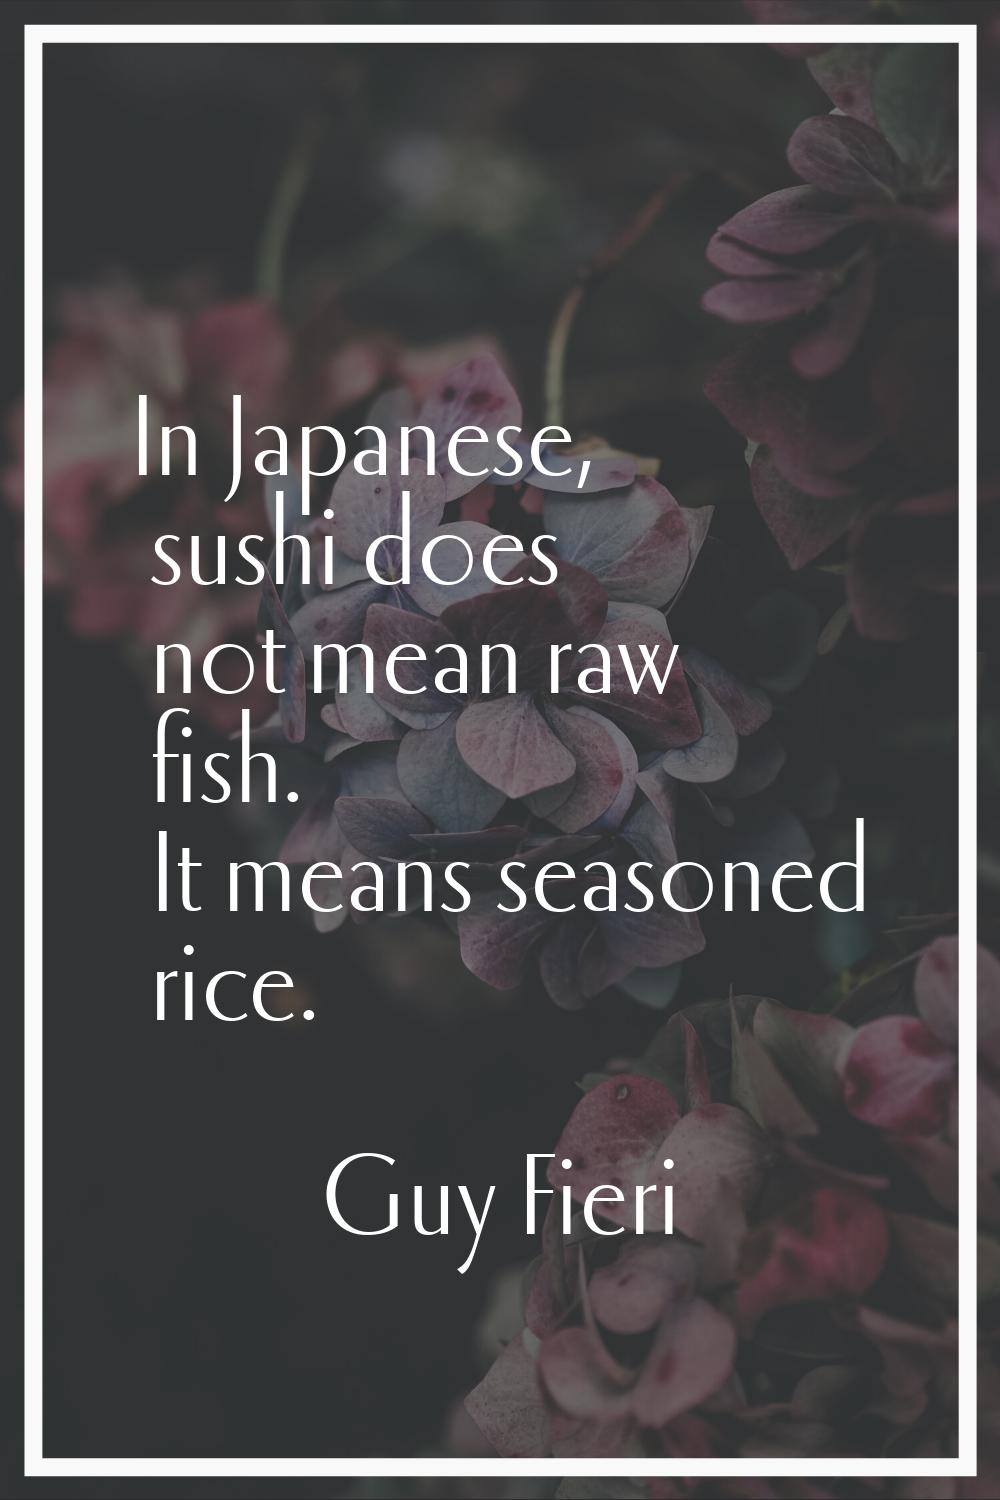 In Japanese, sushi does not mean raw fish. It means seasoned rice.